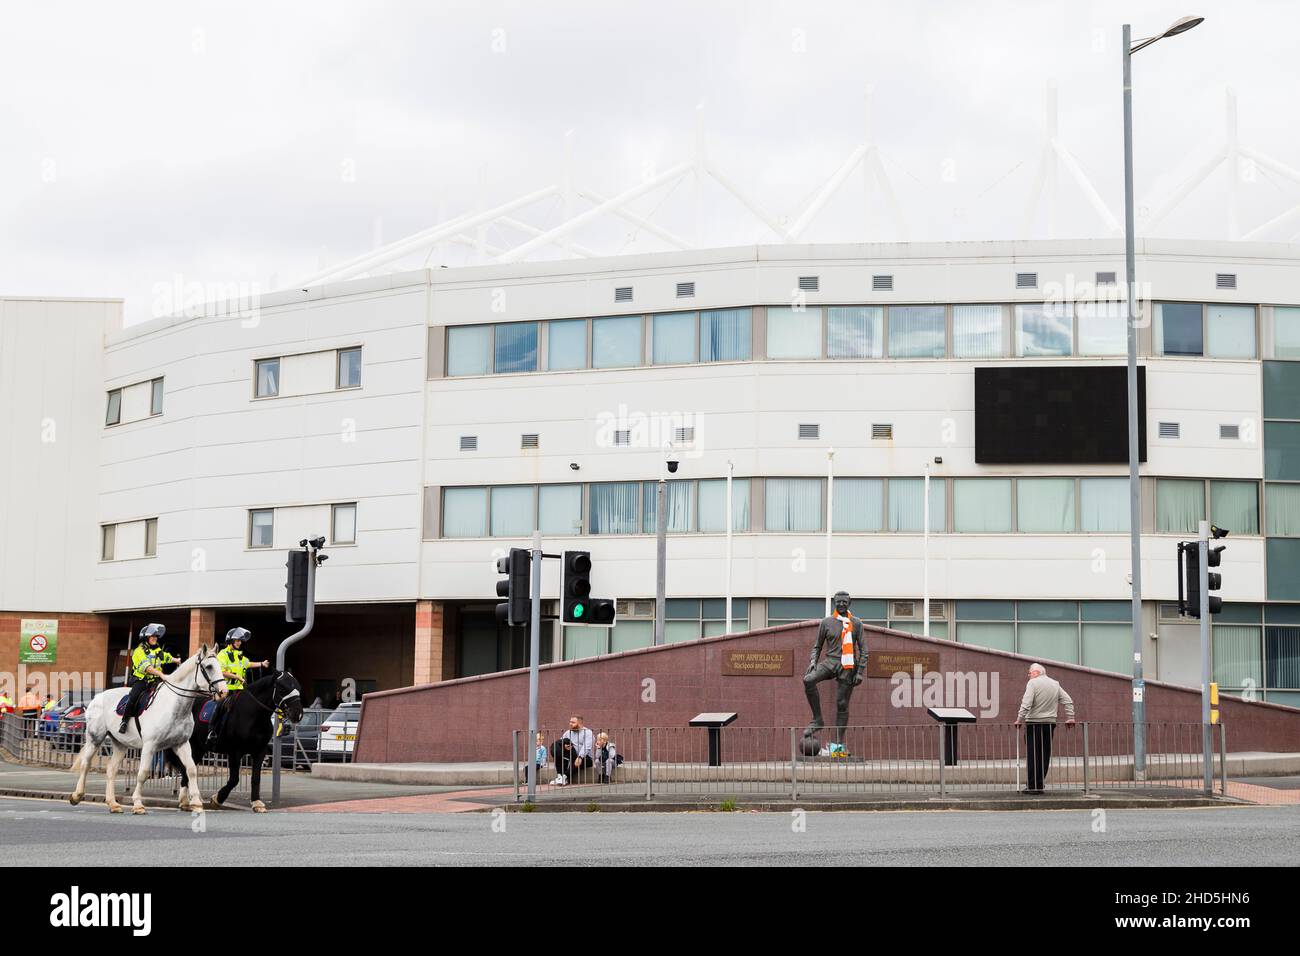 Police on horseback outside Bloomfield Road stadium on a matchday. Stock Photo